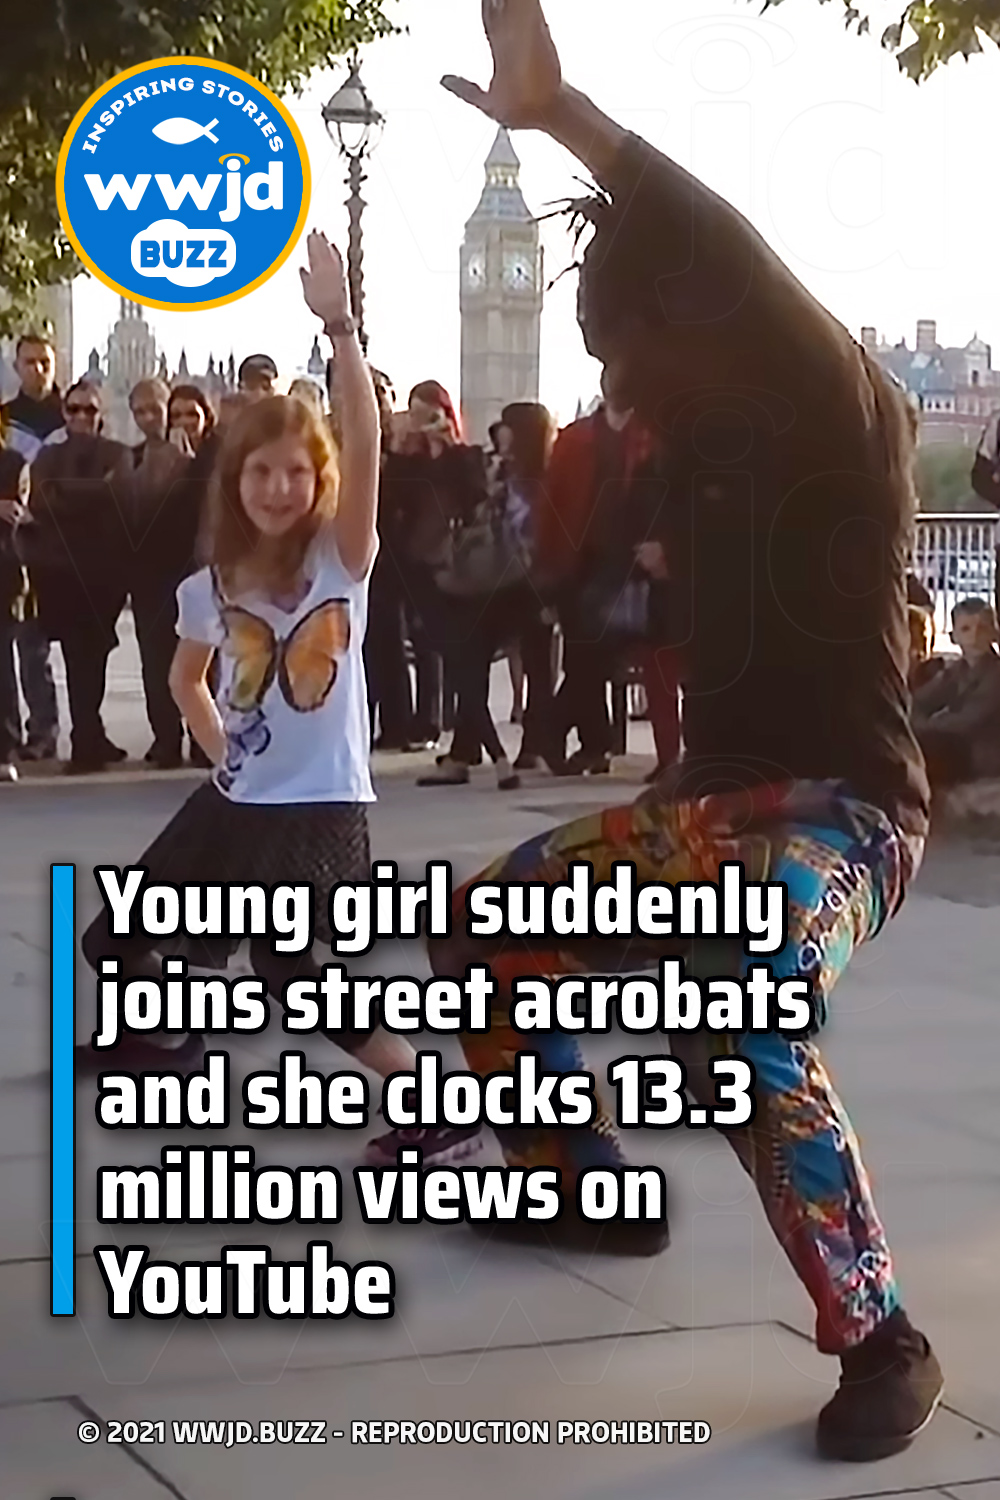 Young girl suddenly joins street acrobats and she clocks 13.3 million views on YouTube